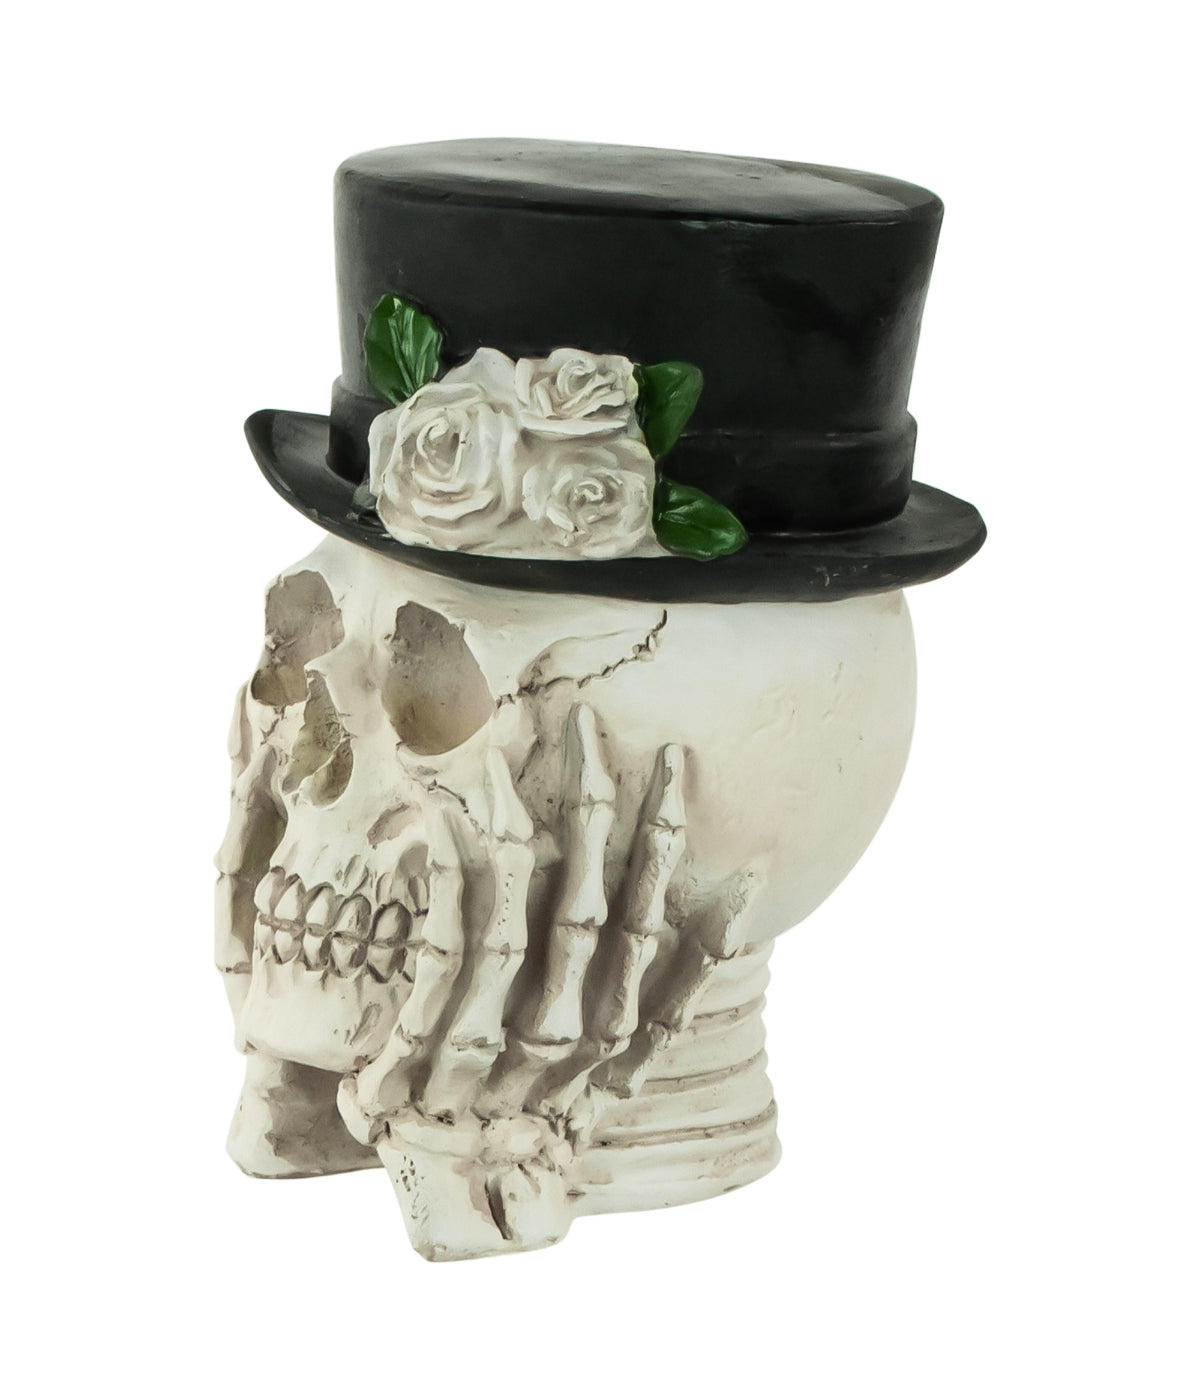 Skull with Top Hat and Roses Halloween Decoration